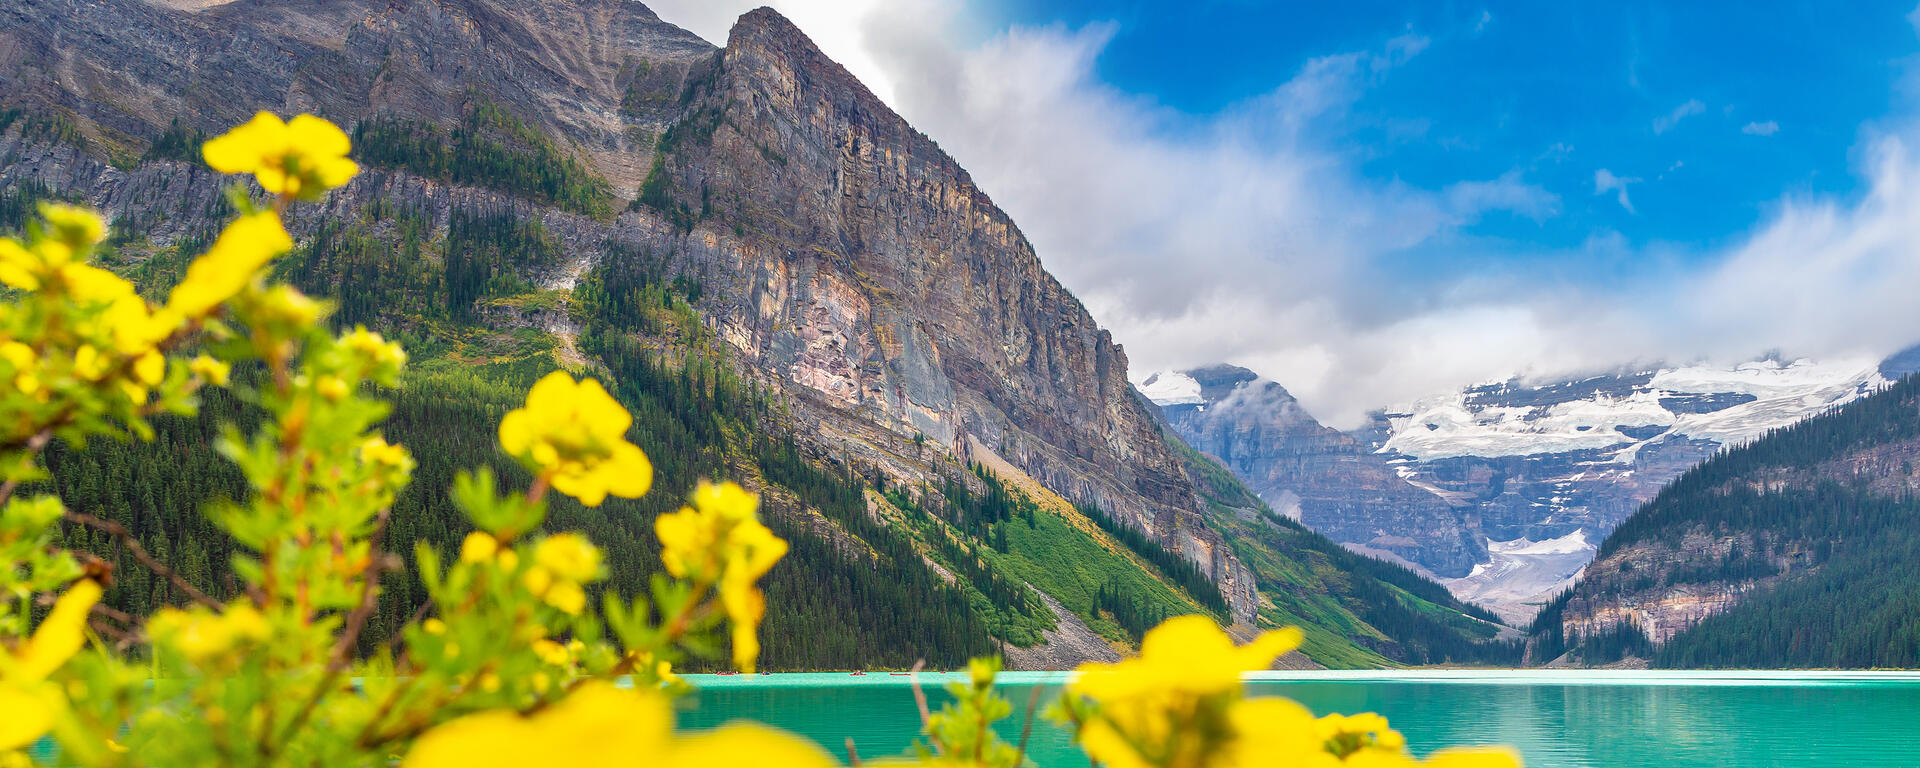 Yellow flowers are in the foreground of the photo. In the background is a turquoise lake with mountains 